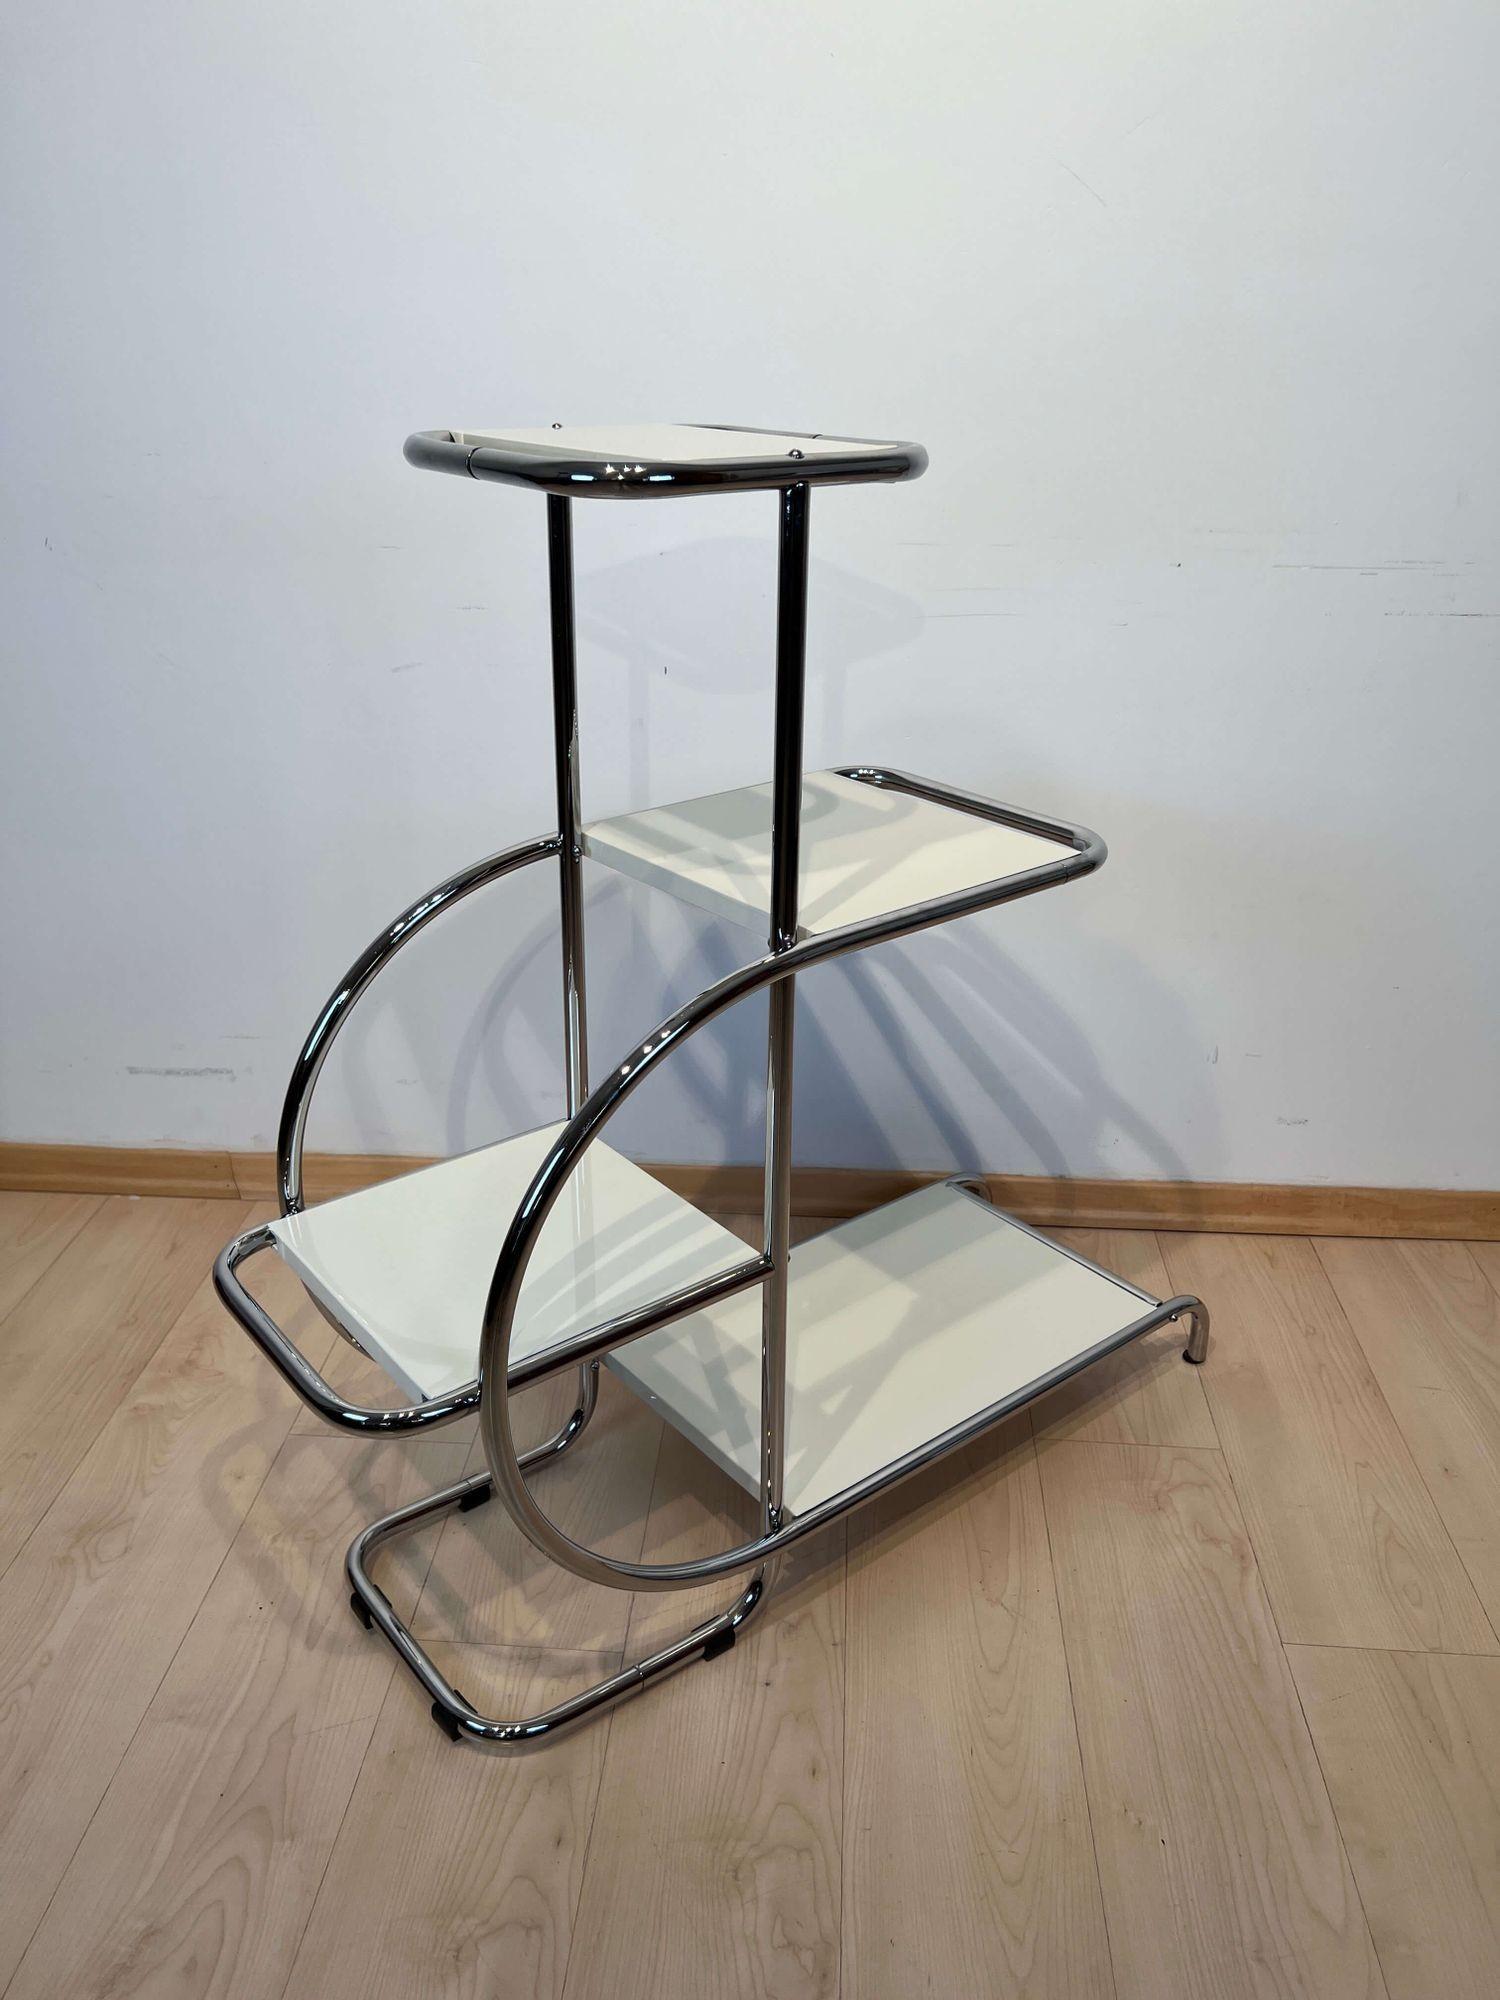 Mid-20th Century Bauhaus Steeltube Etagere, Creme-White Lacquer, Nickel Plate, Germany, 1930s For Sale